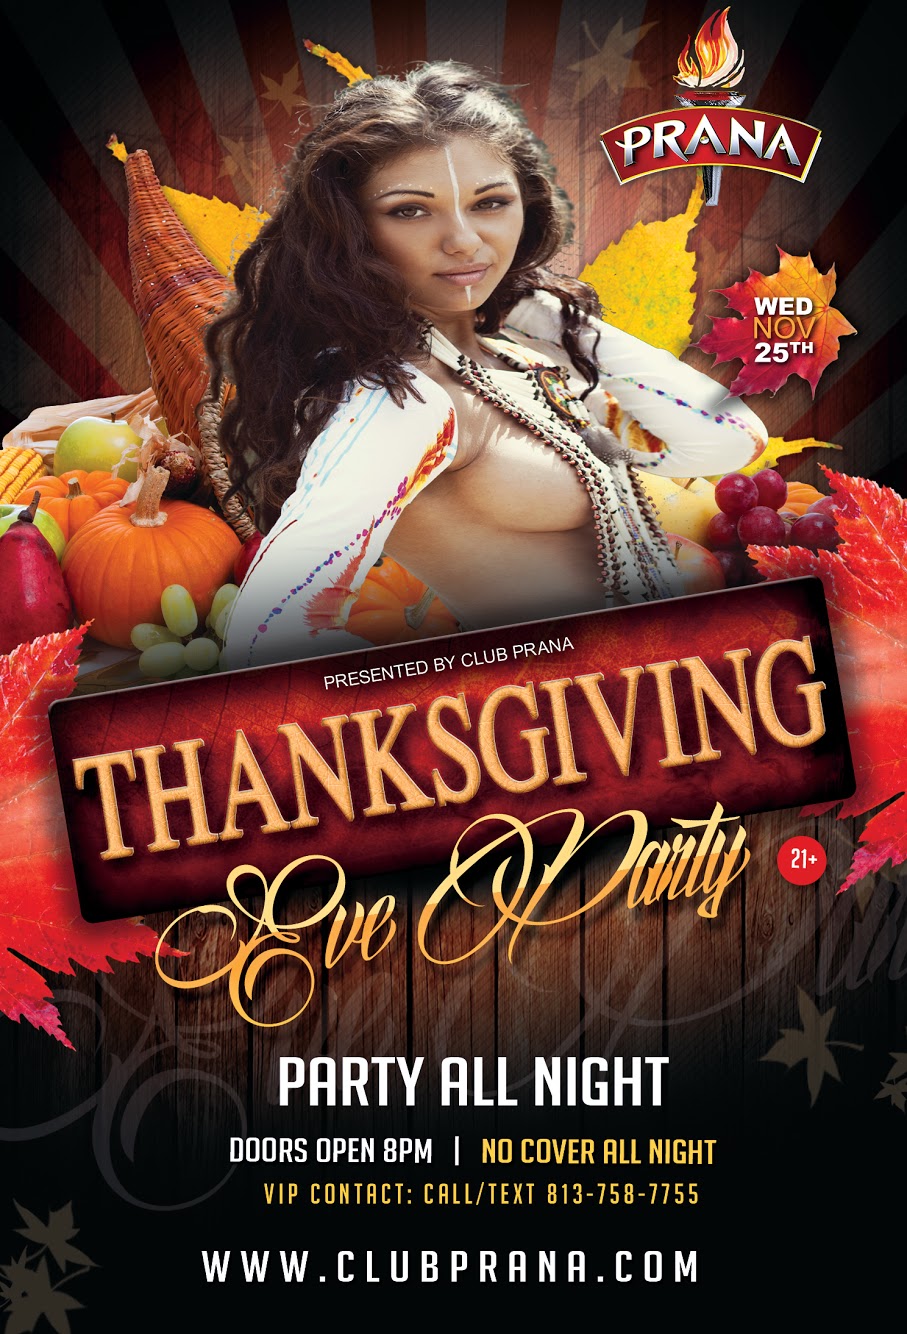 Thanksgiving Eve Party